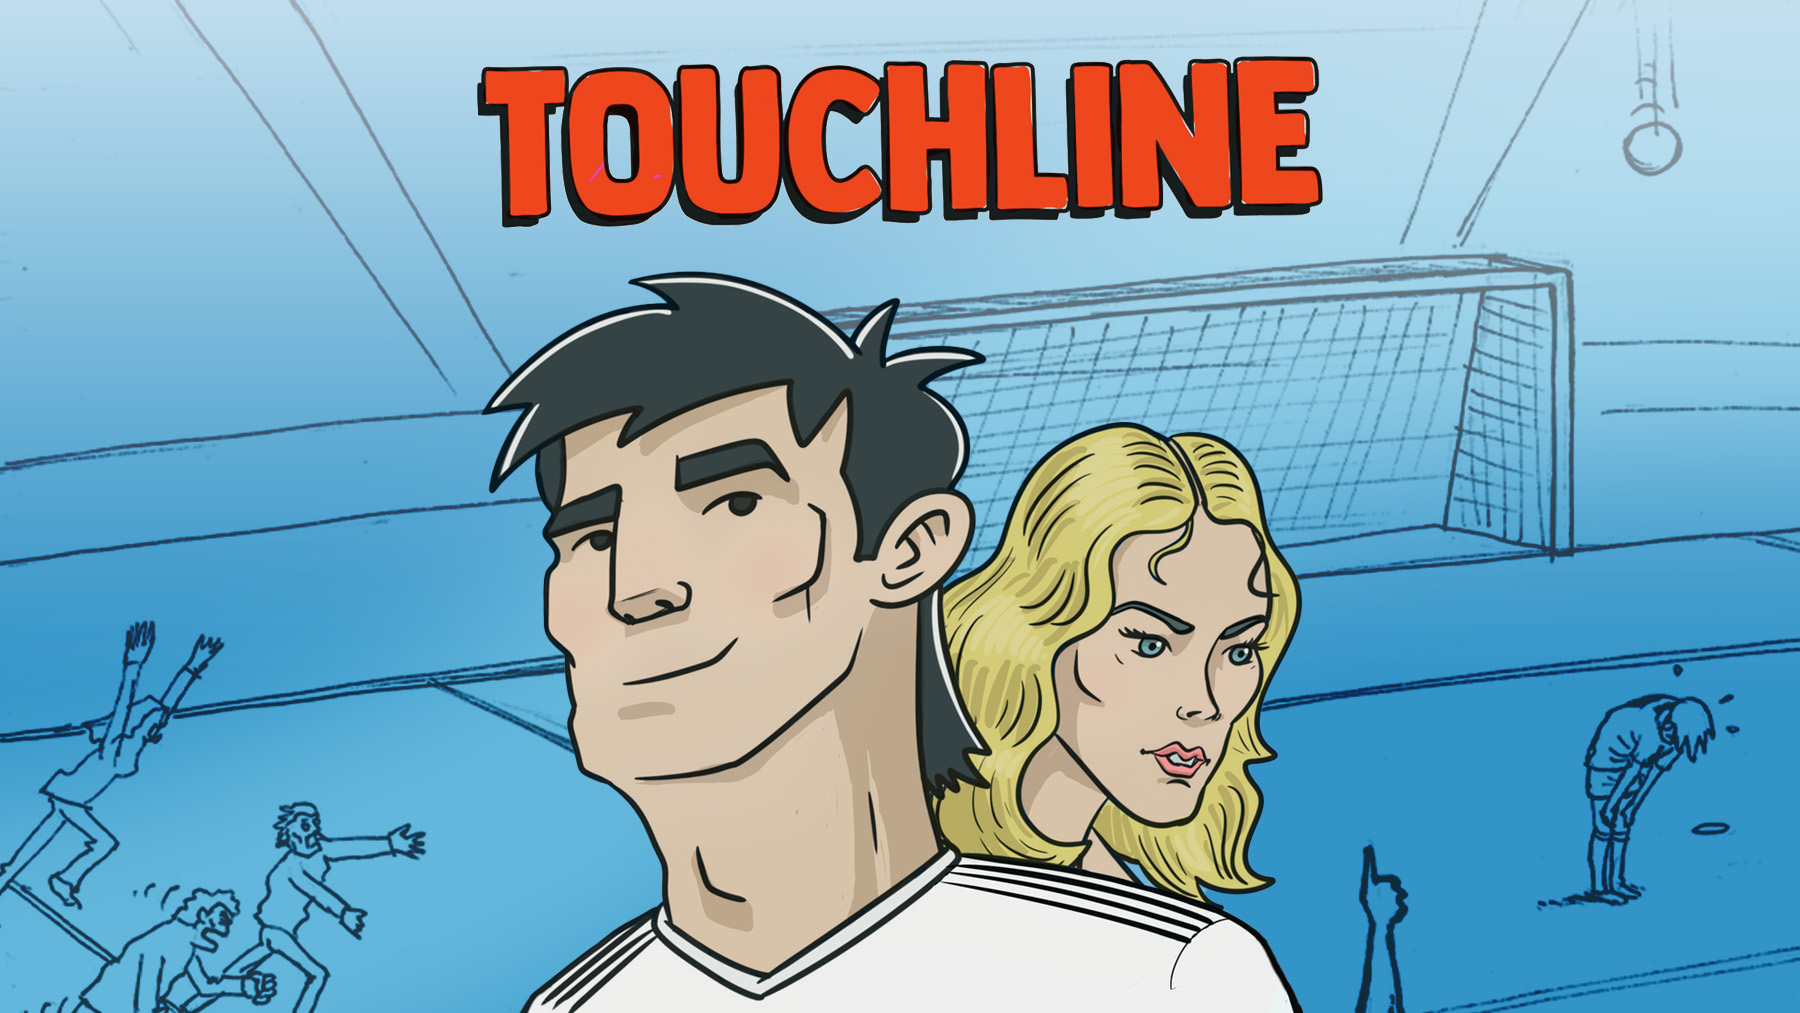 Touchline - A football comic story.